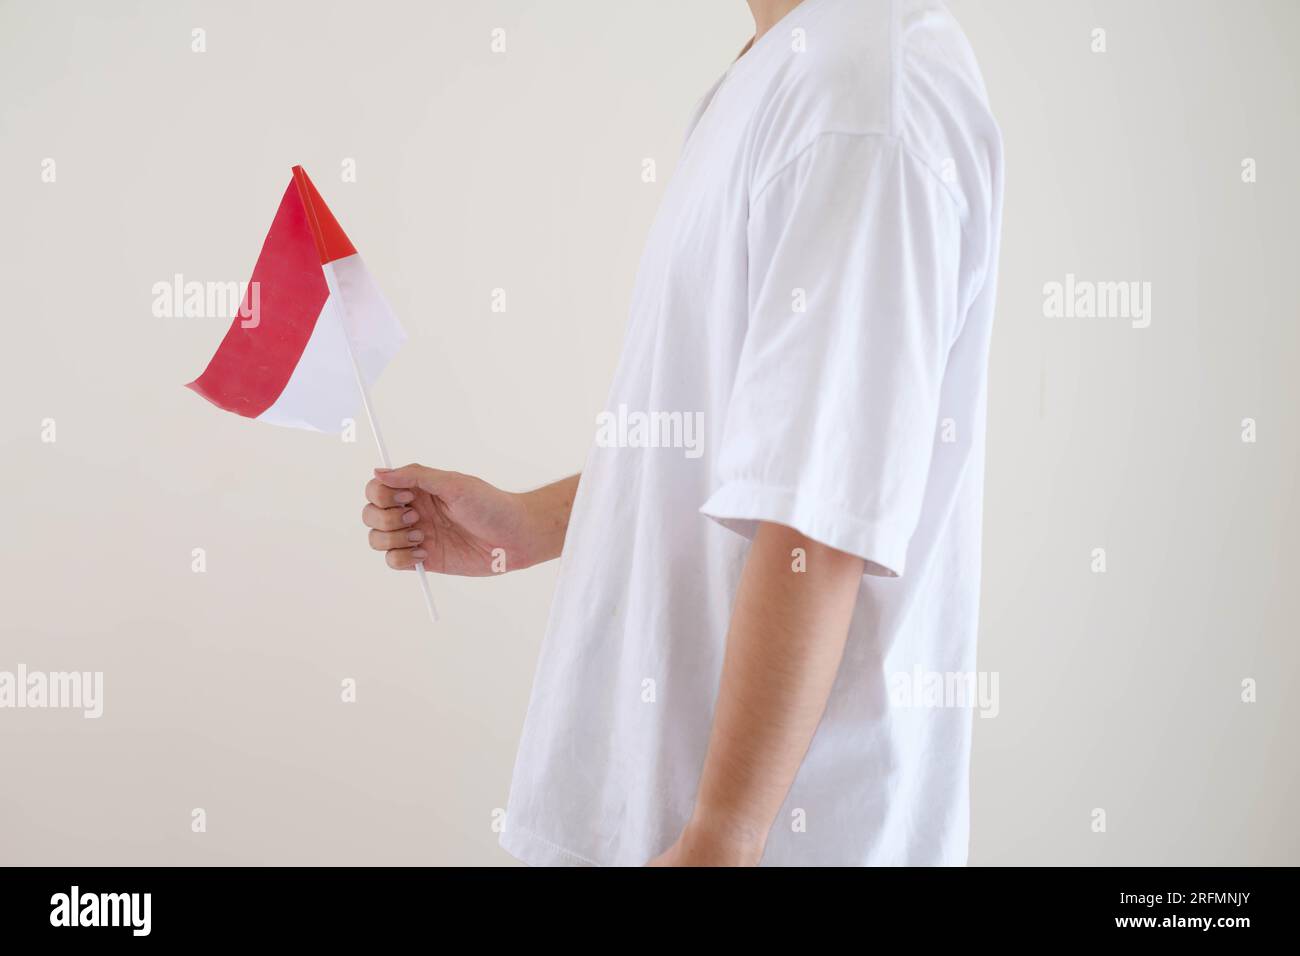 A man wearing white T-Shirt is holding Bendera Indonesia or Indonesian flag while facing the left side on isolated white background. Stock Photo